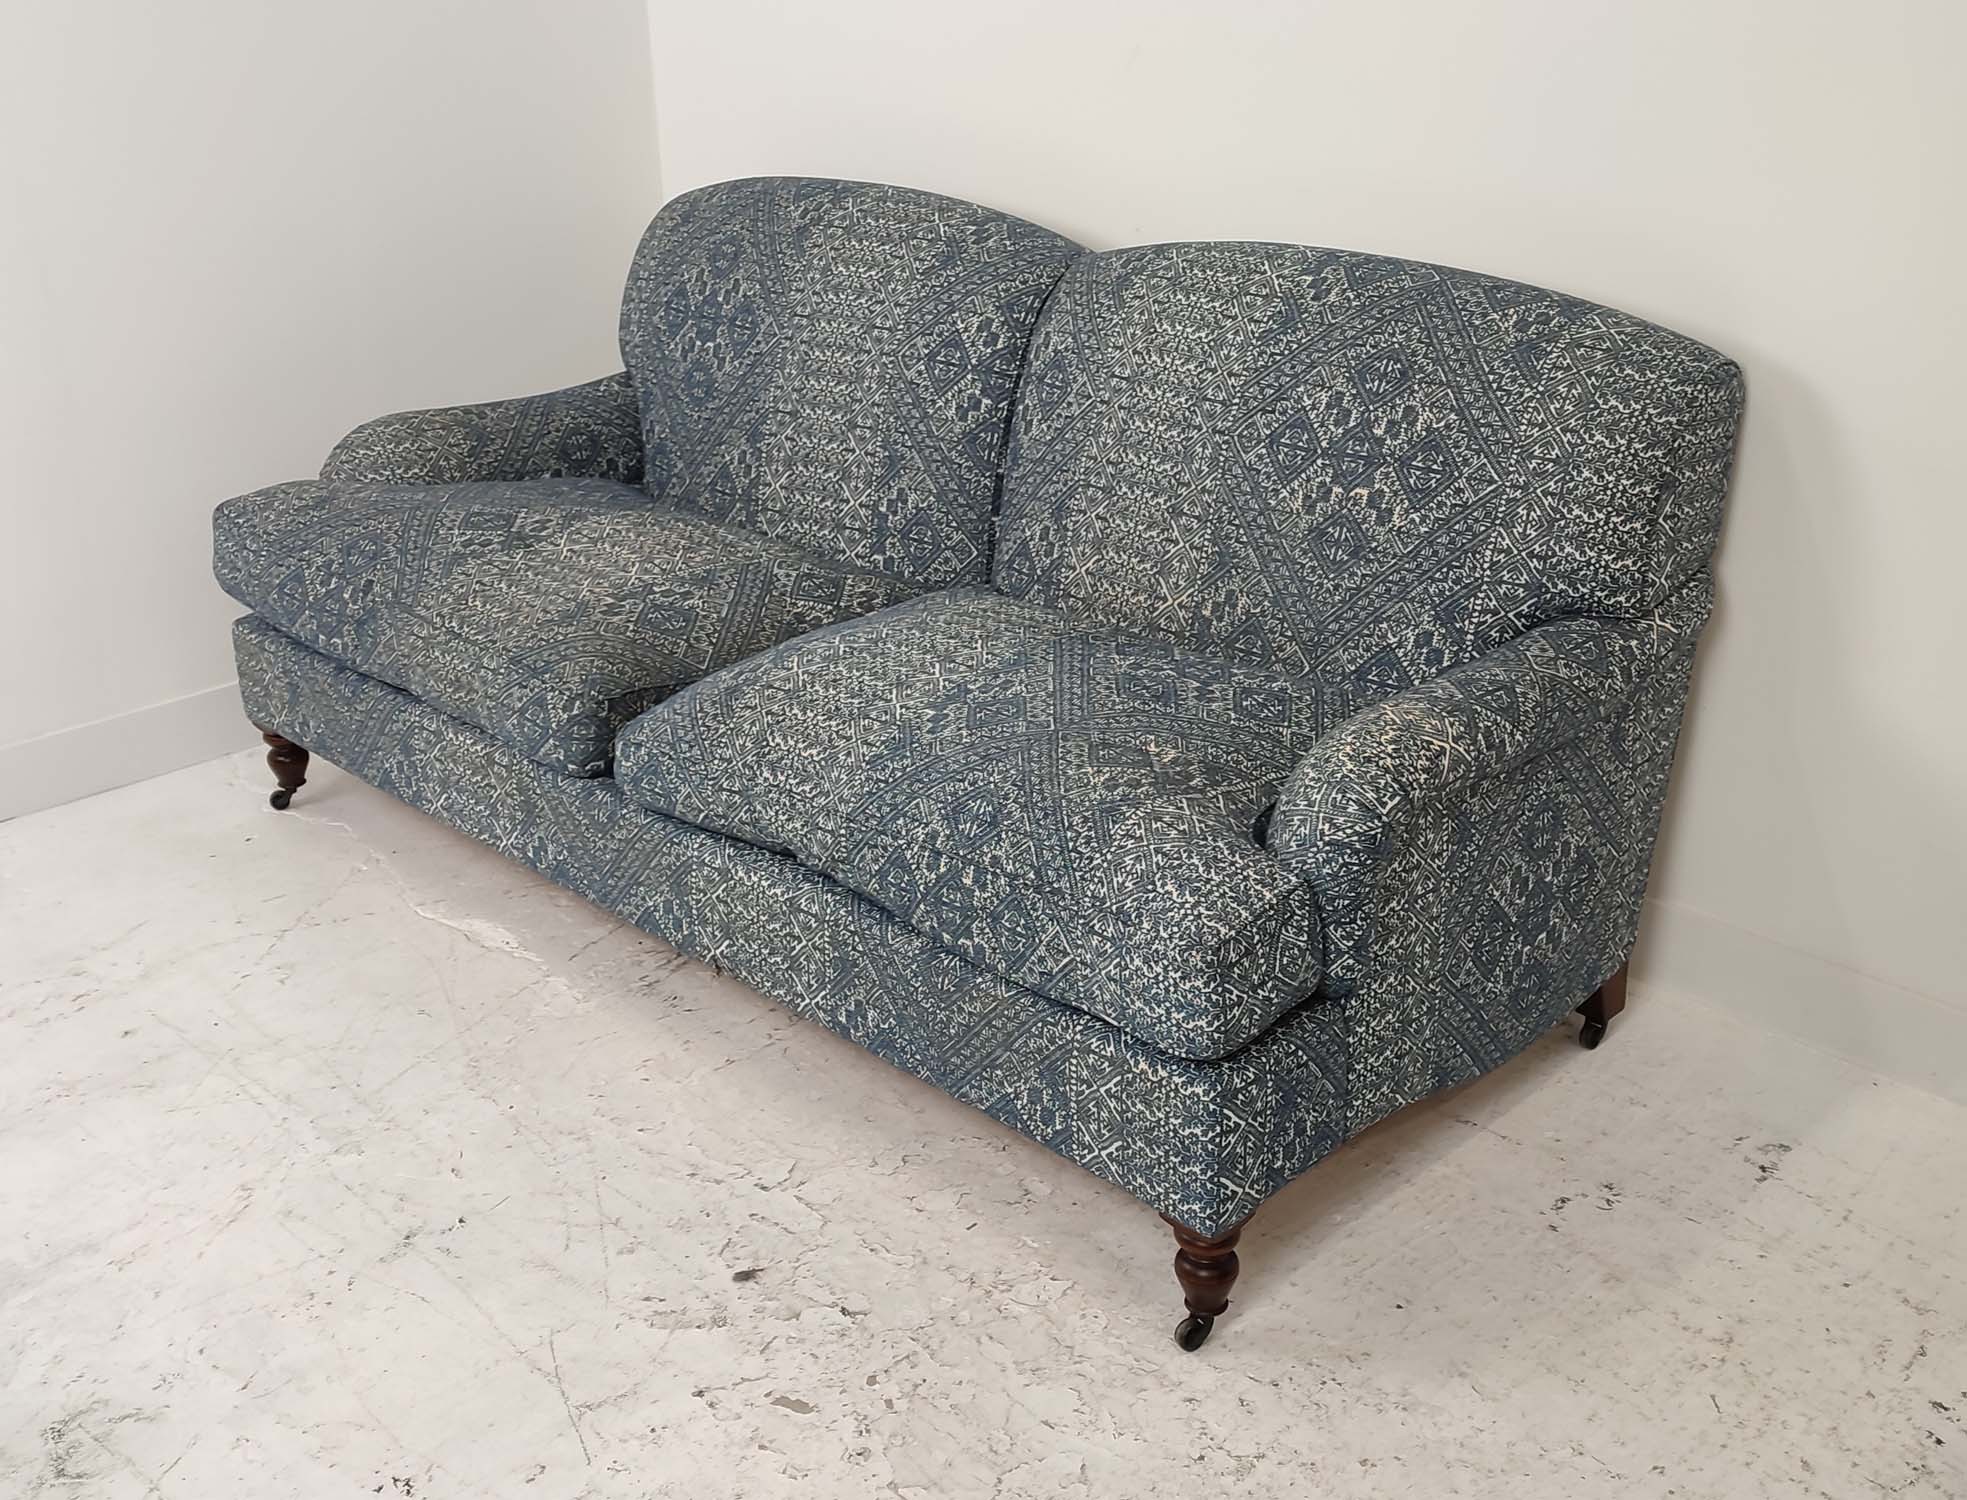 KINGCOME STRATFORD SOFA, in blue upholstery on turned supports, 200cm W x 88cm H x 95cm D. - Image 3 of 7